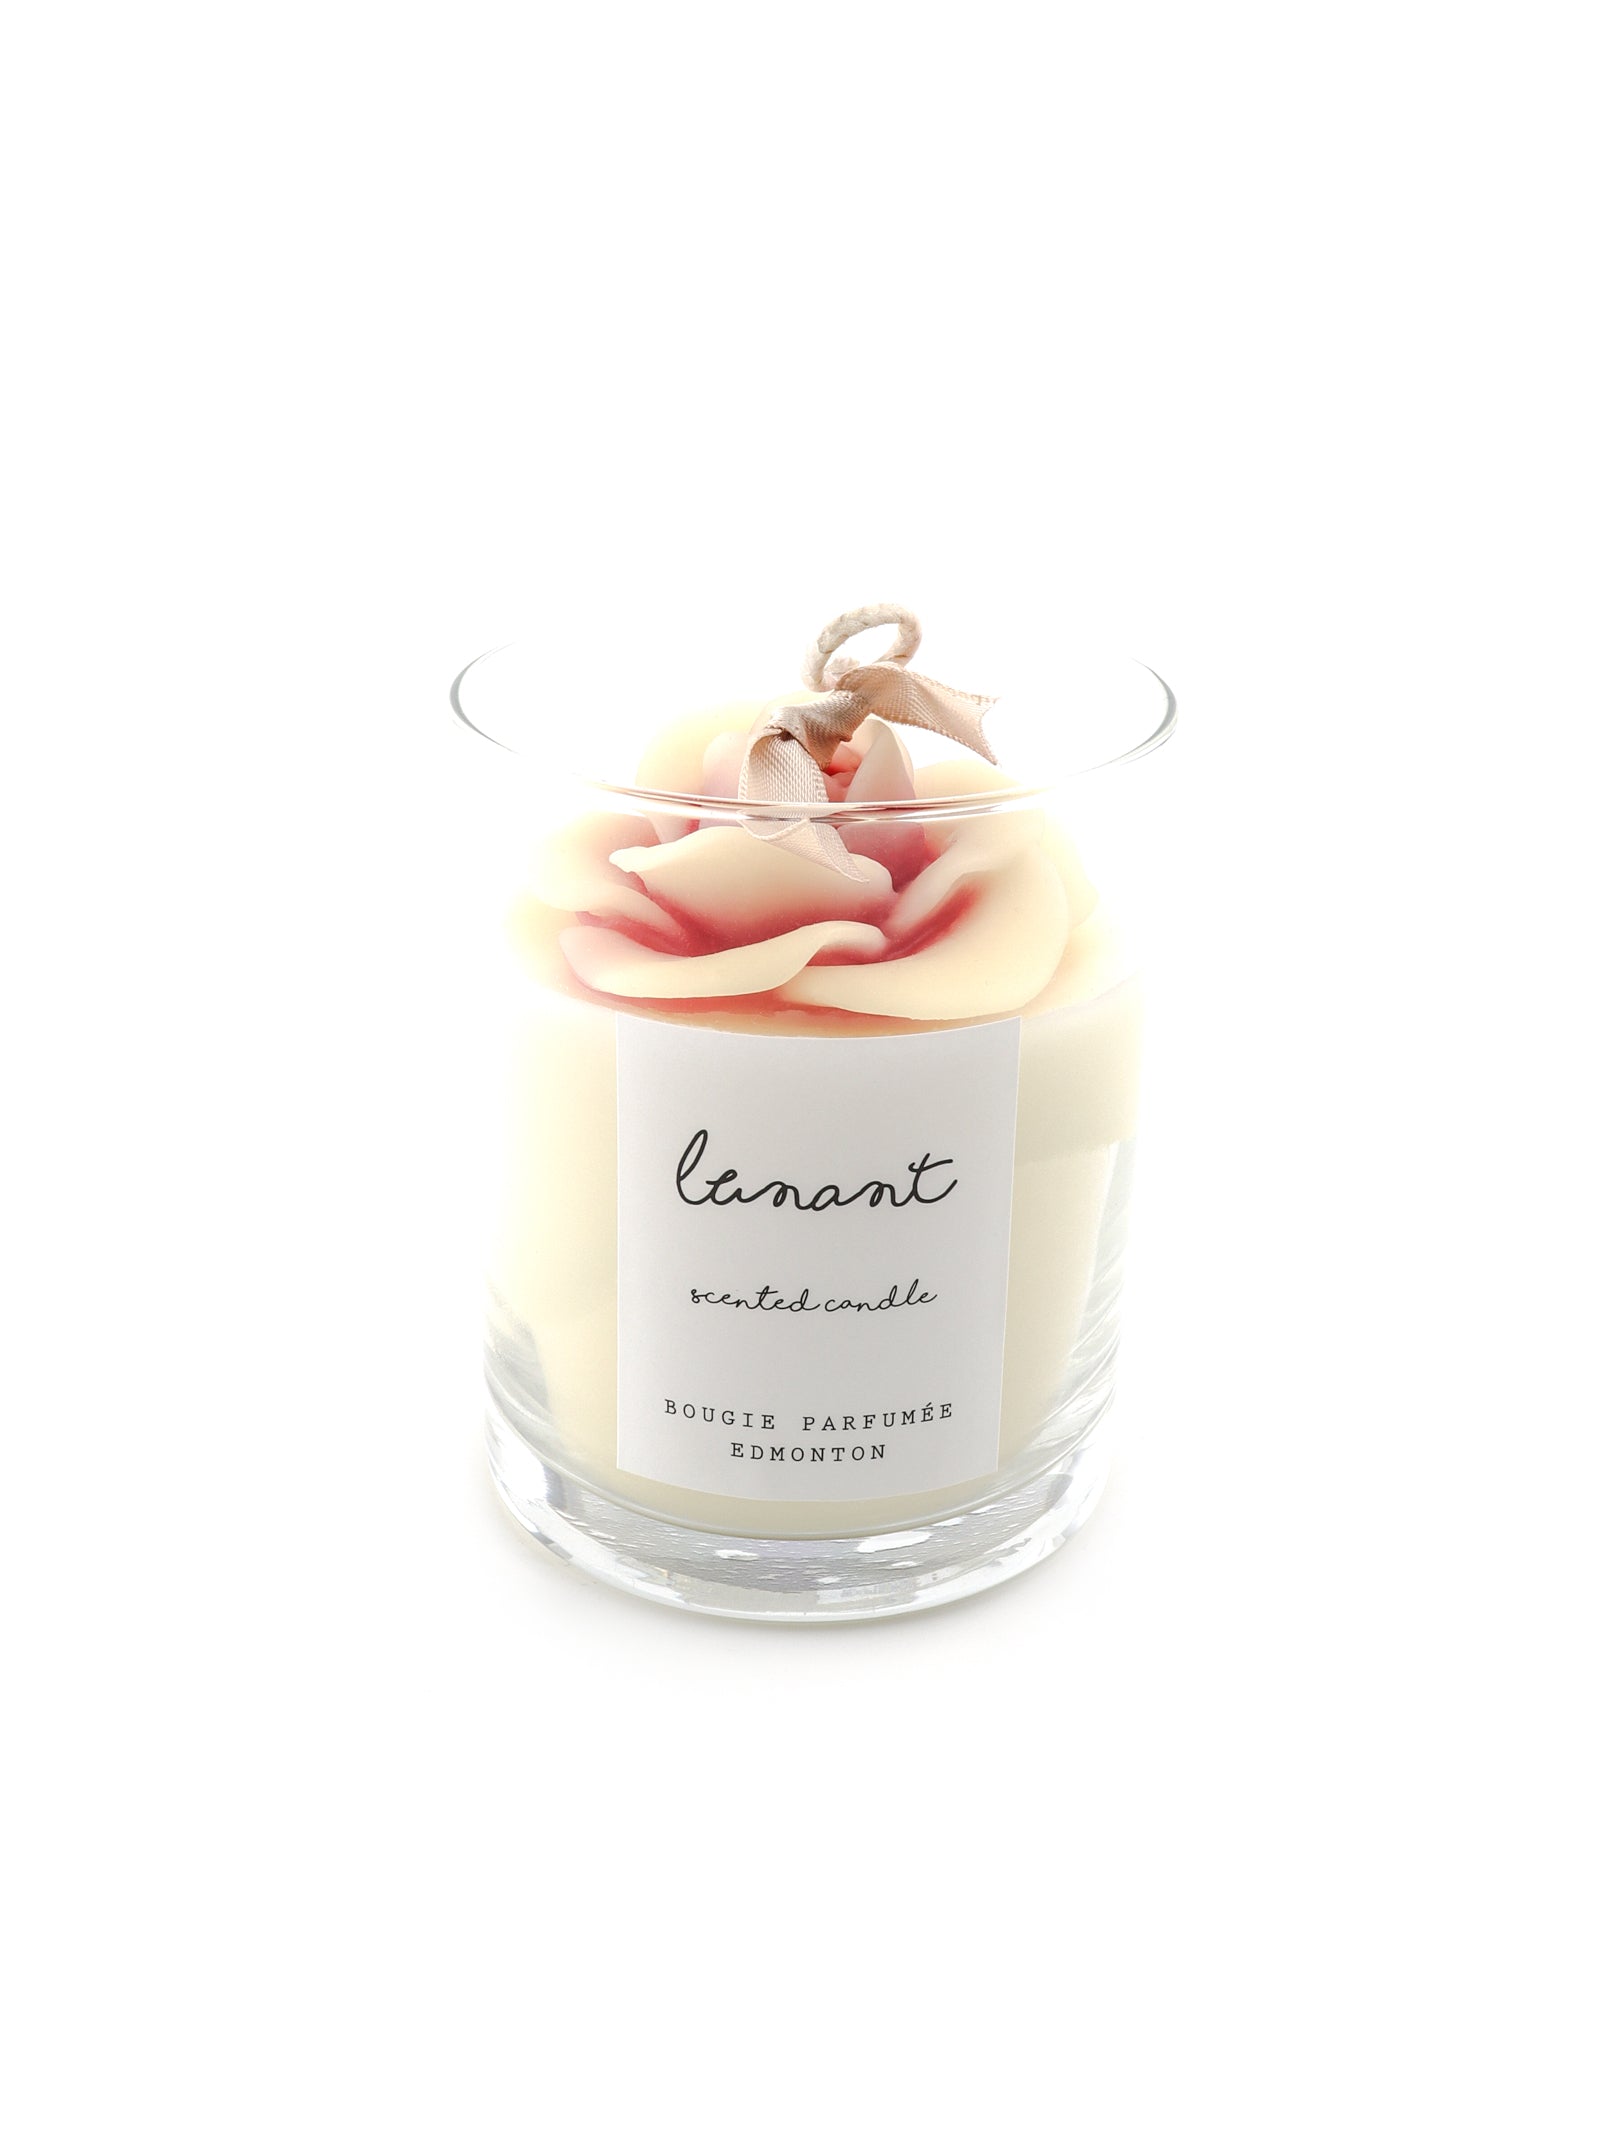 BLING PROVENCE ROSE CANDLE